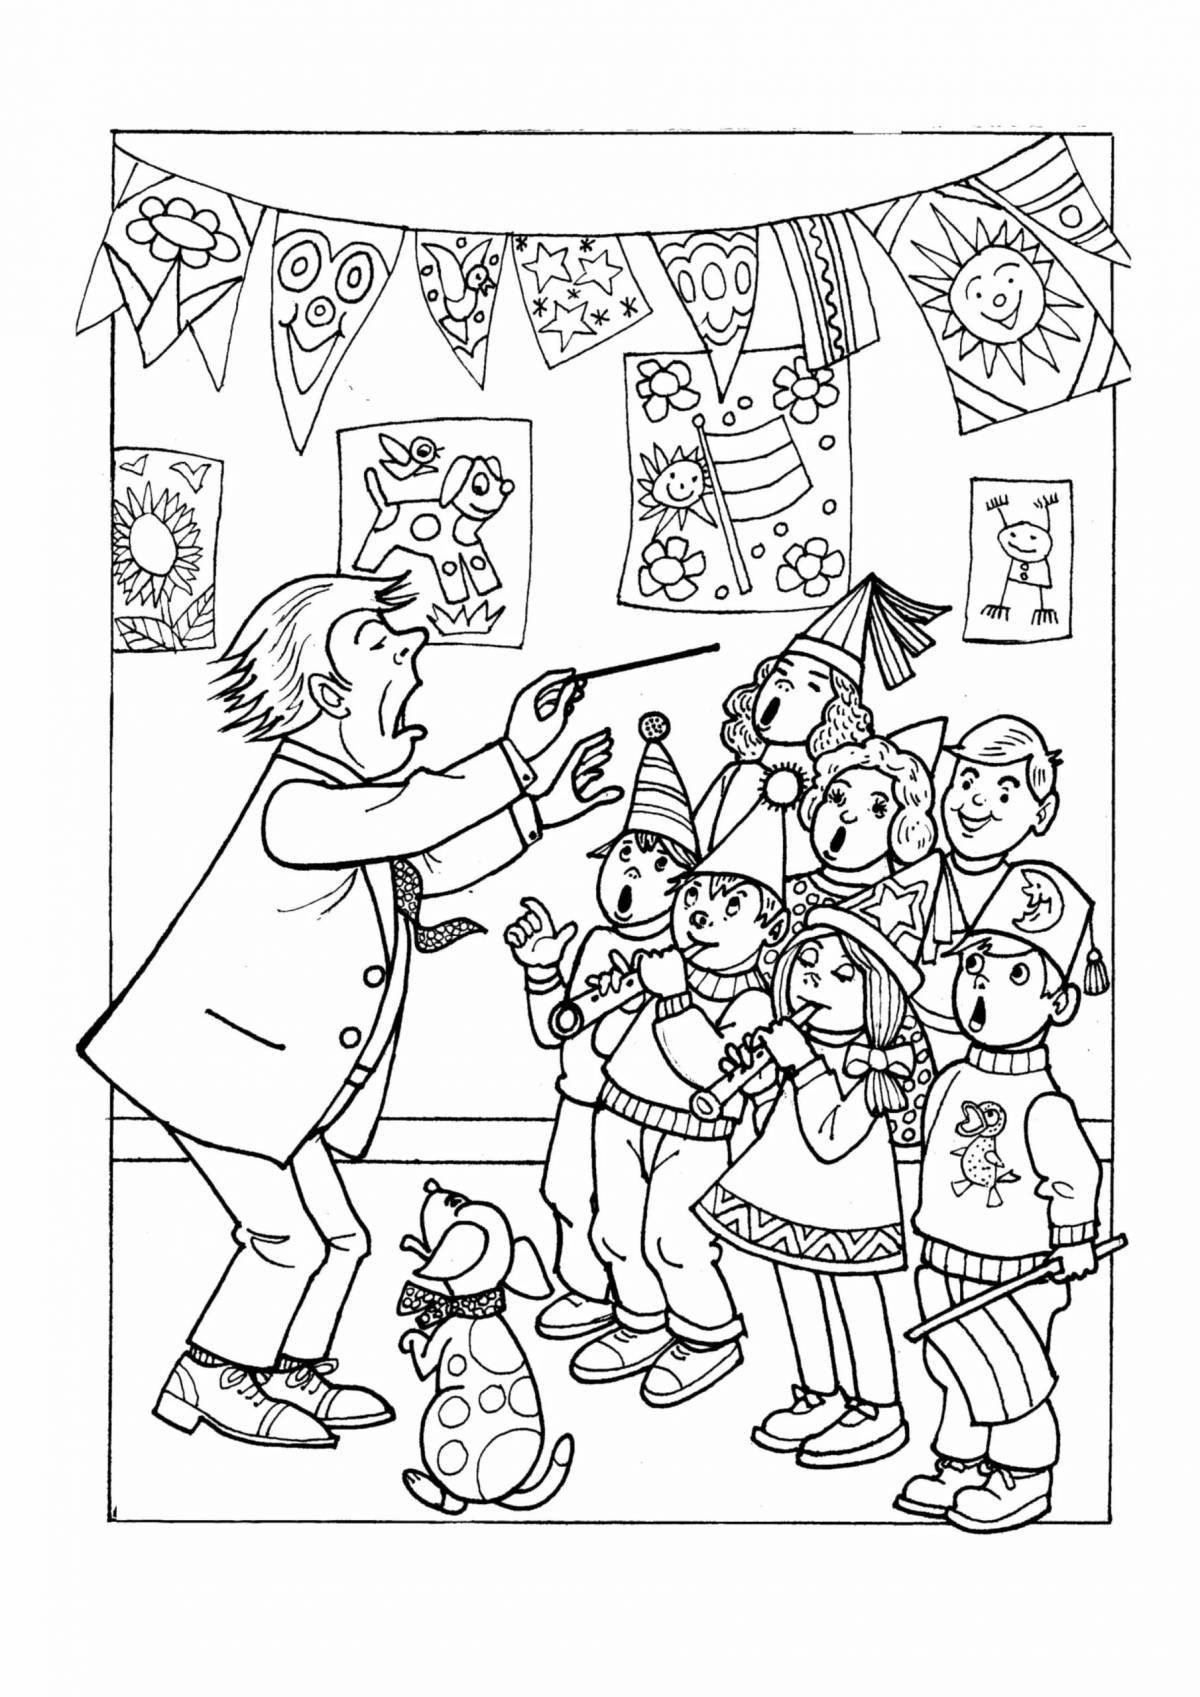 Chorus of glowing coloring pages